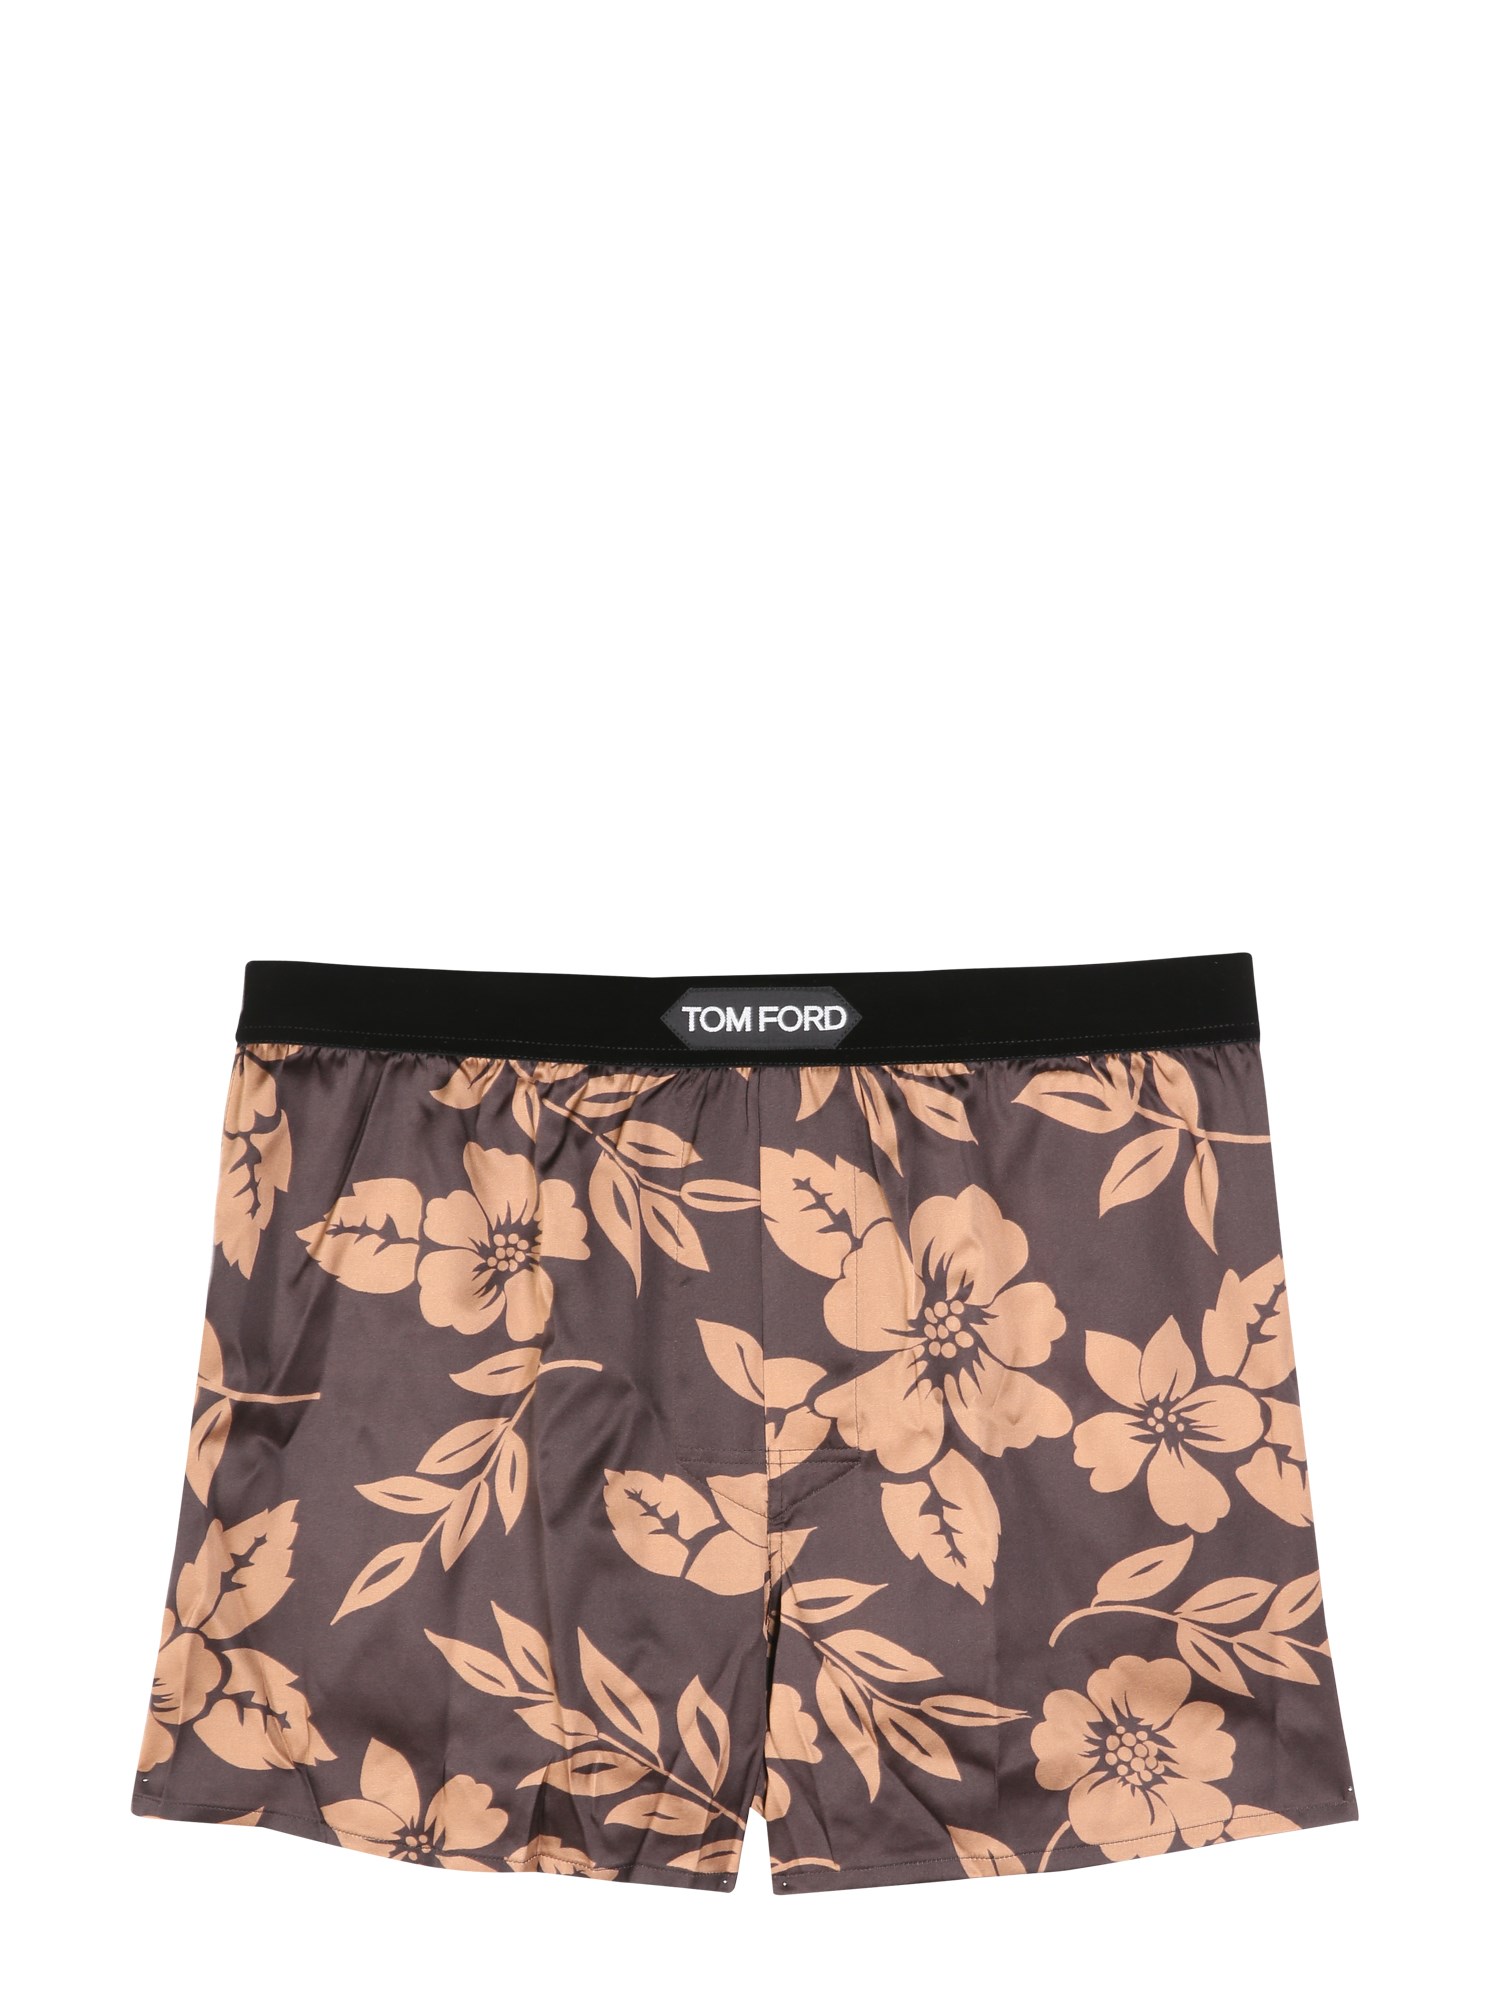 tom ford silk boxers